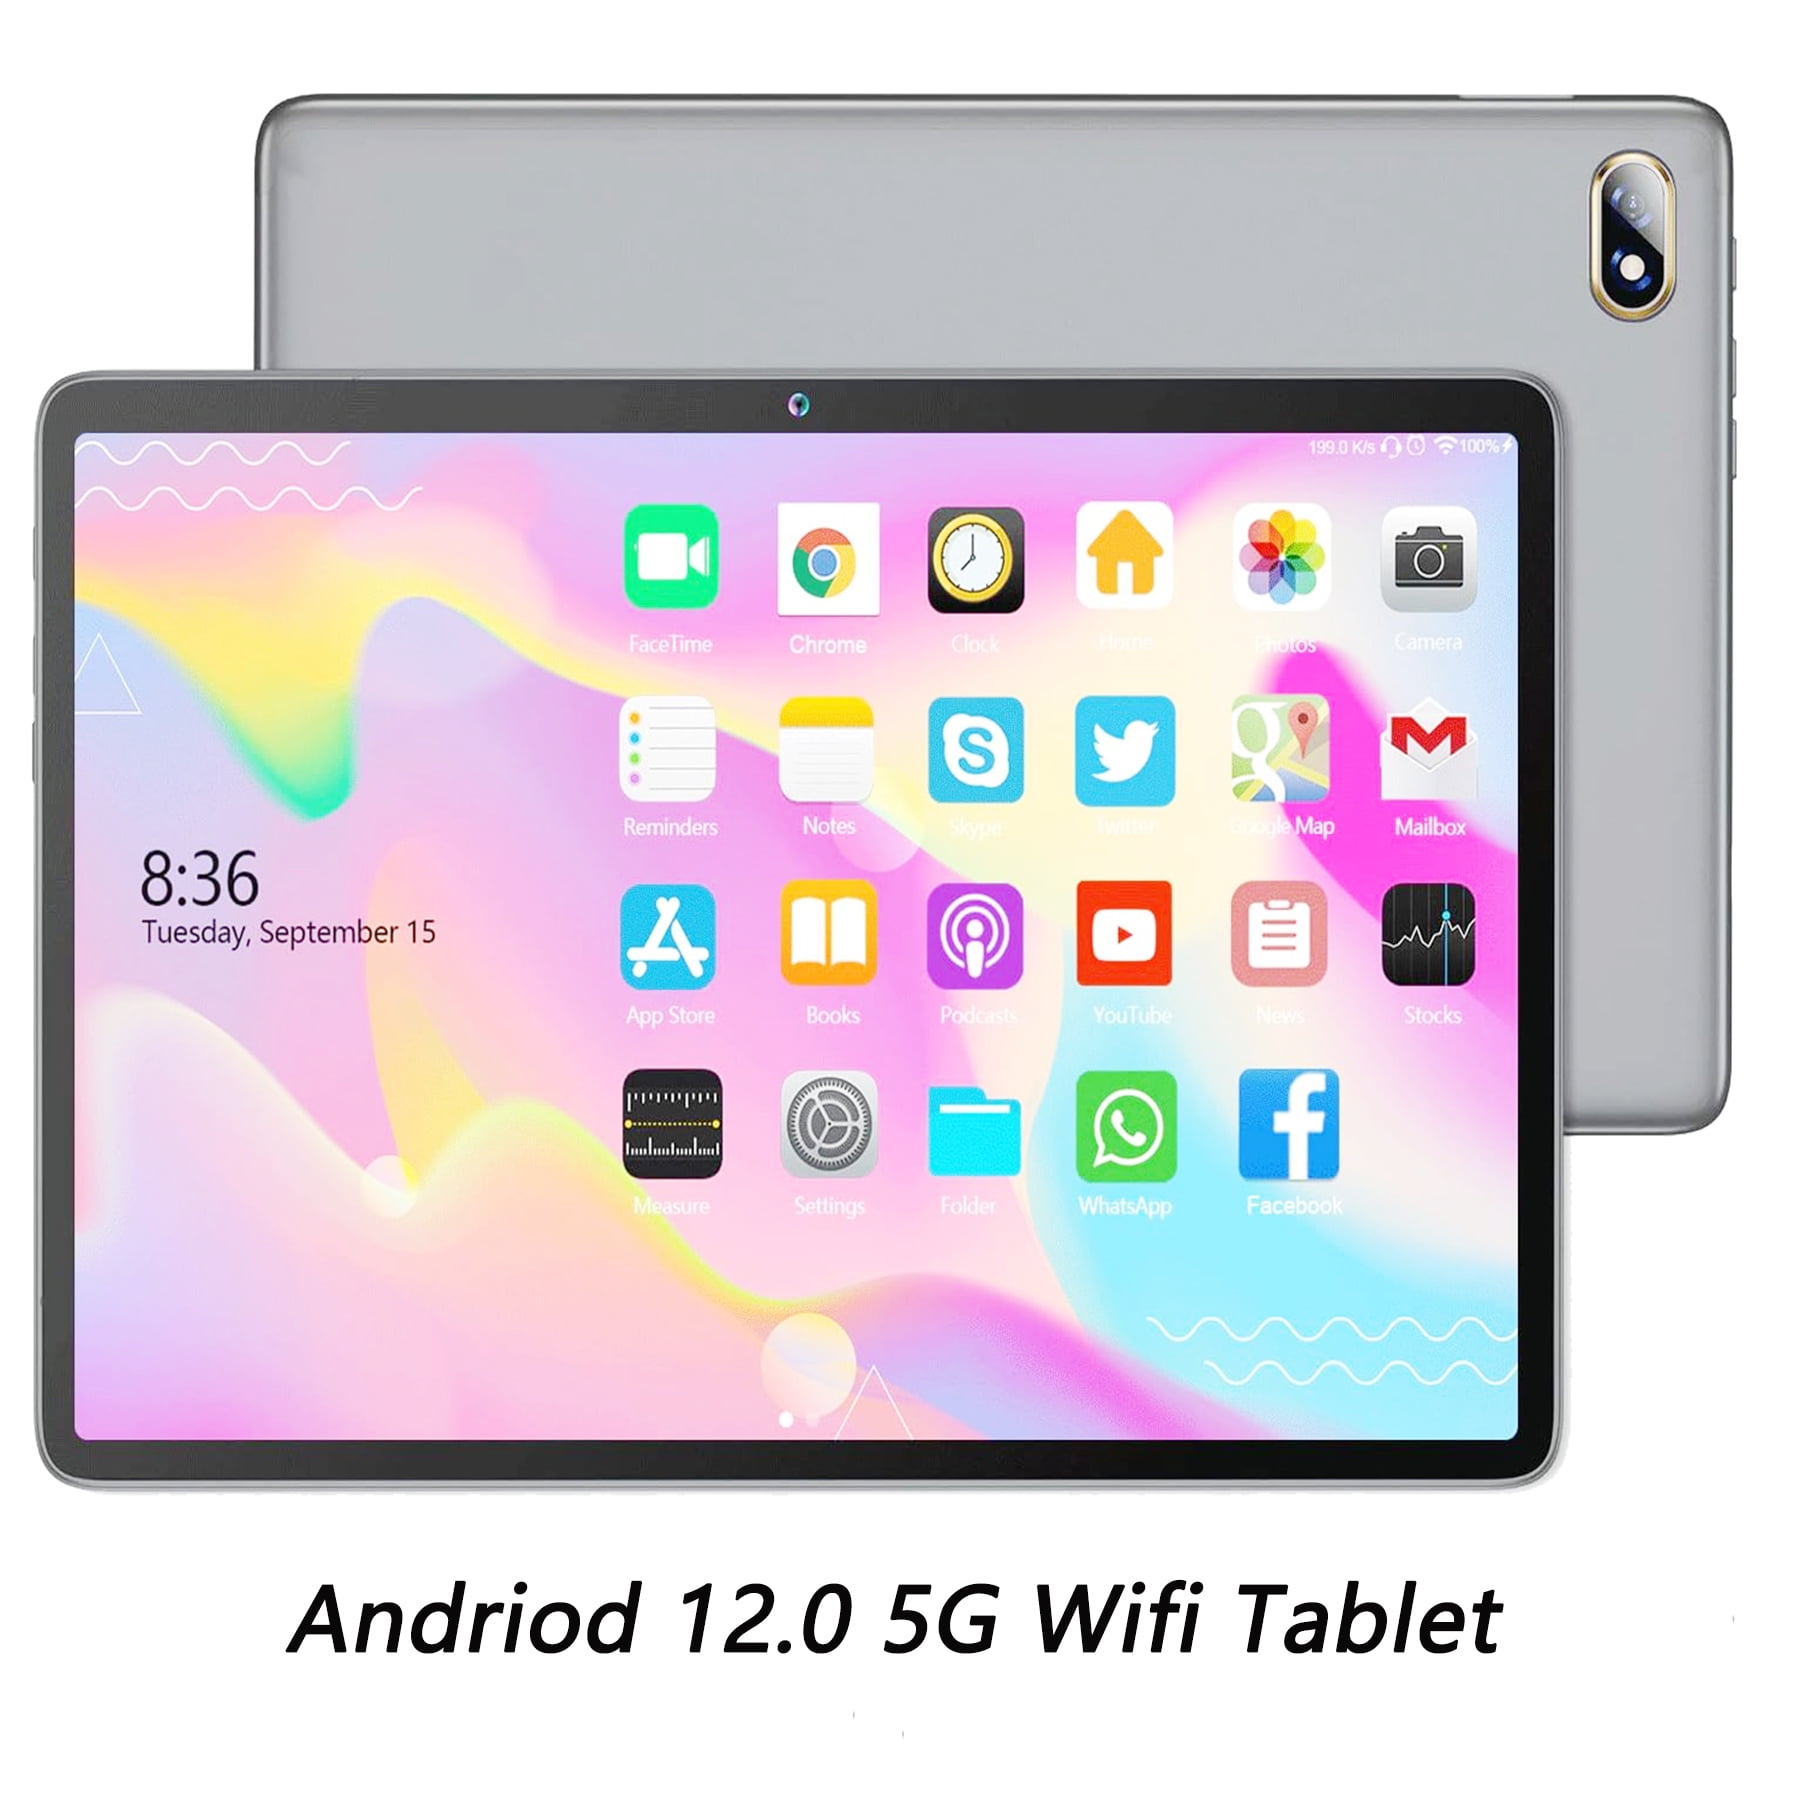 Tablets 10.1 inch Android 12 Tablet 5G Wifi Tablet Octa-Core Arm